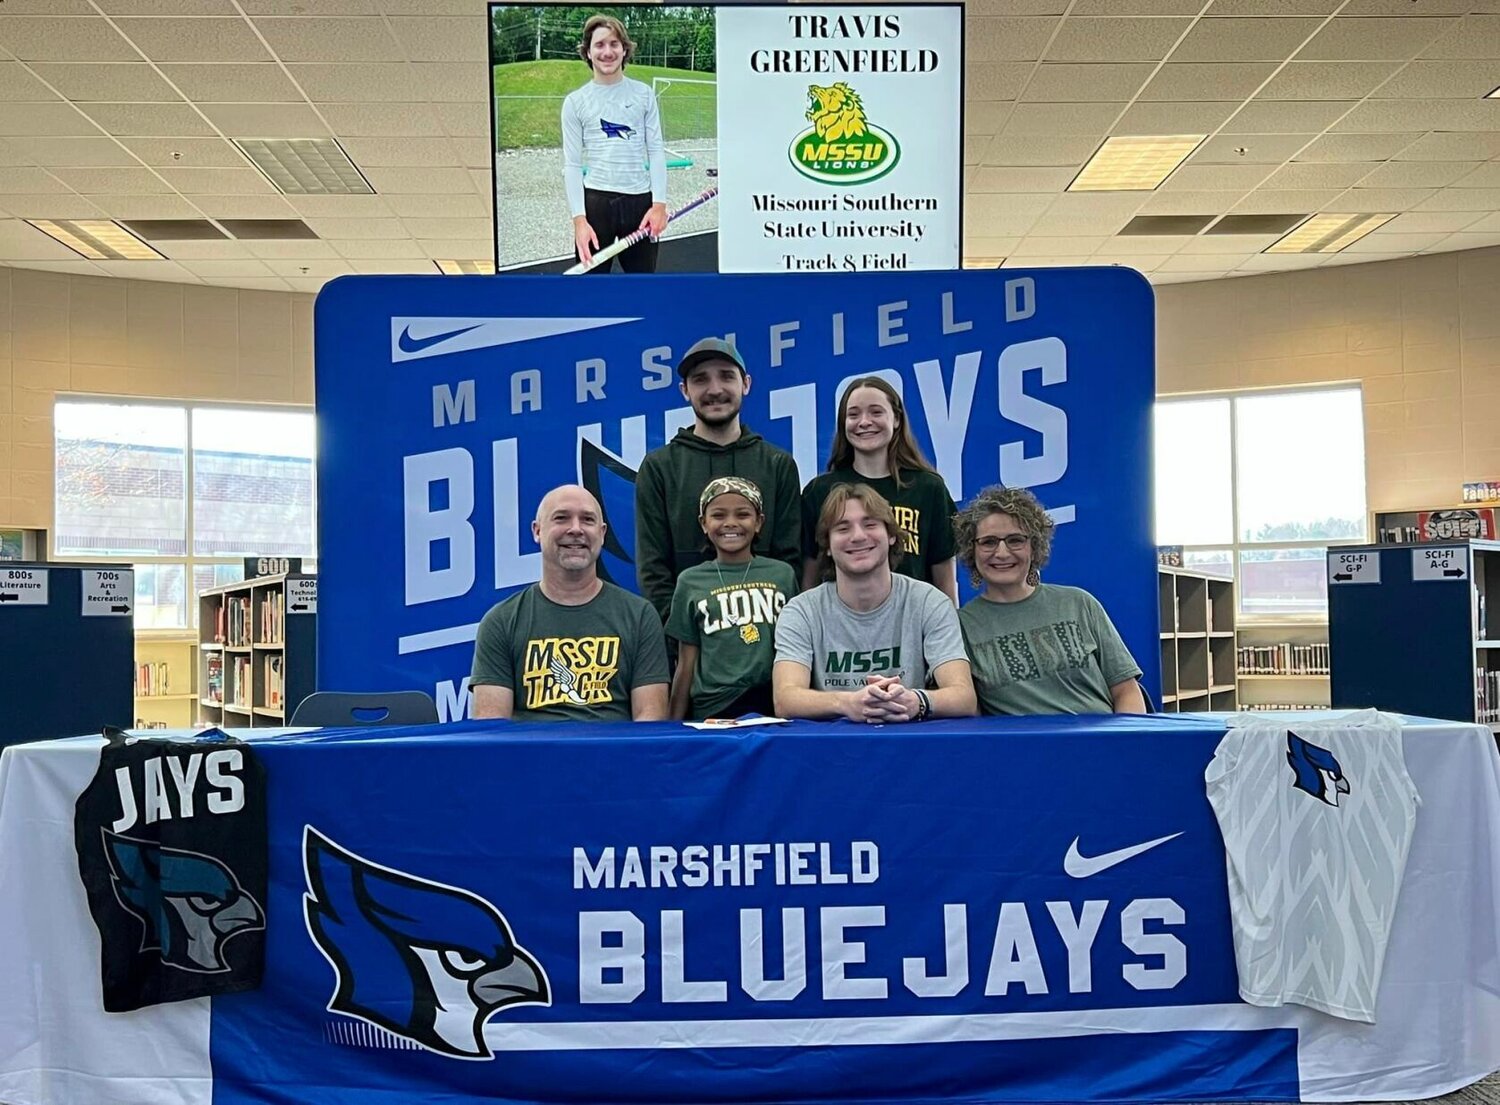 Smiling with his family is Travis Greenfield after signing his letter of intent to play track and field at Missouri Southern State University.